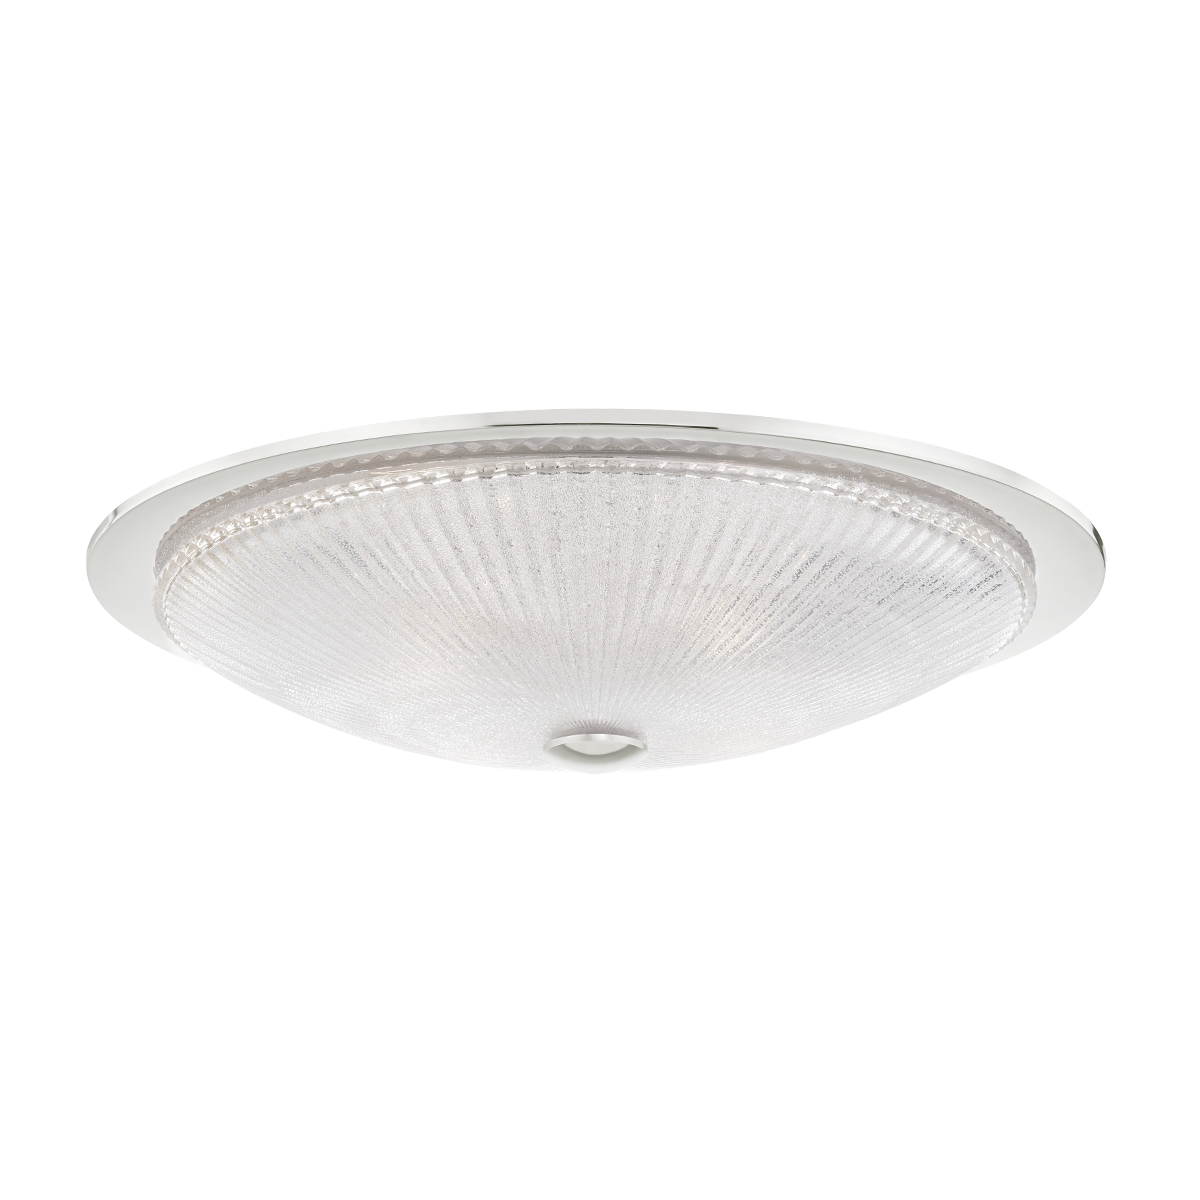 Steel with Piastra Glass Shade Round Flush Mount